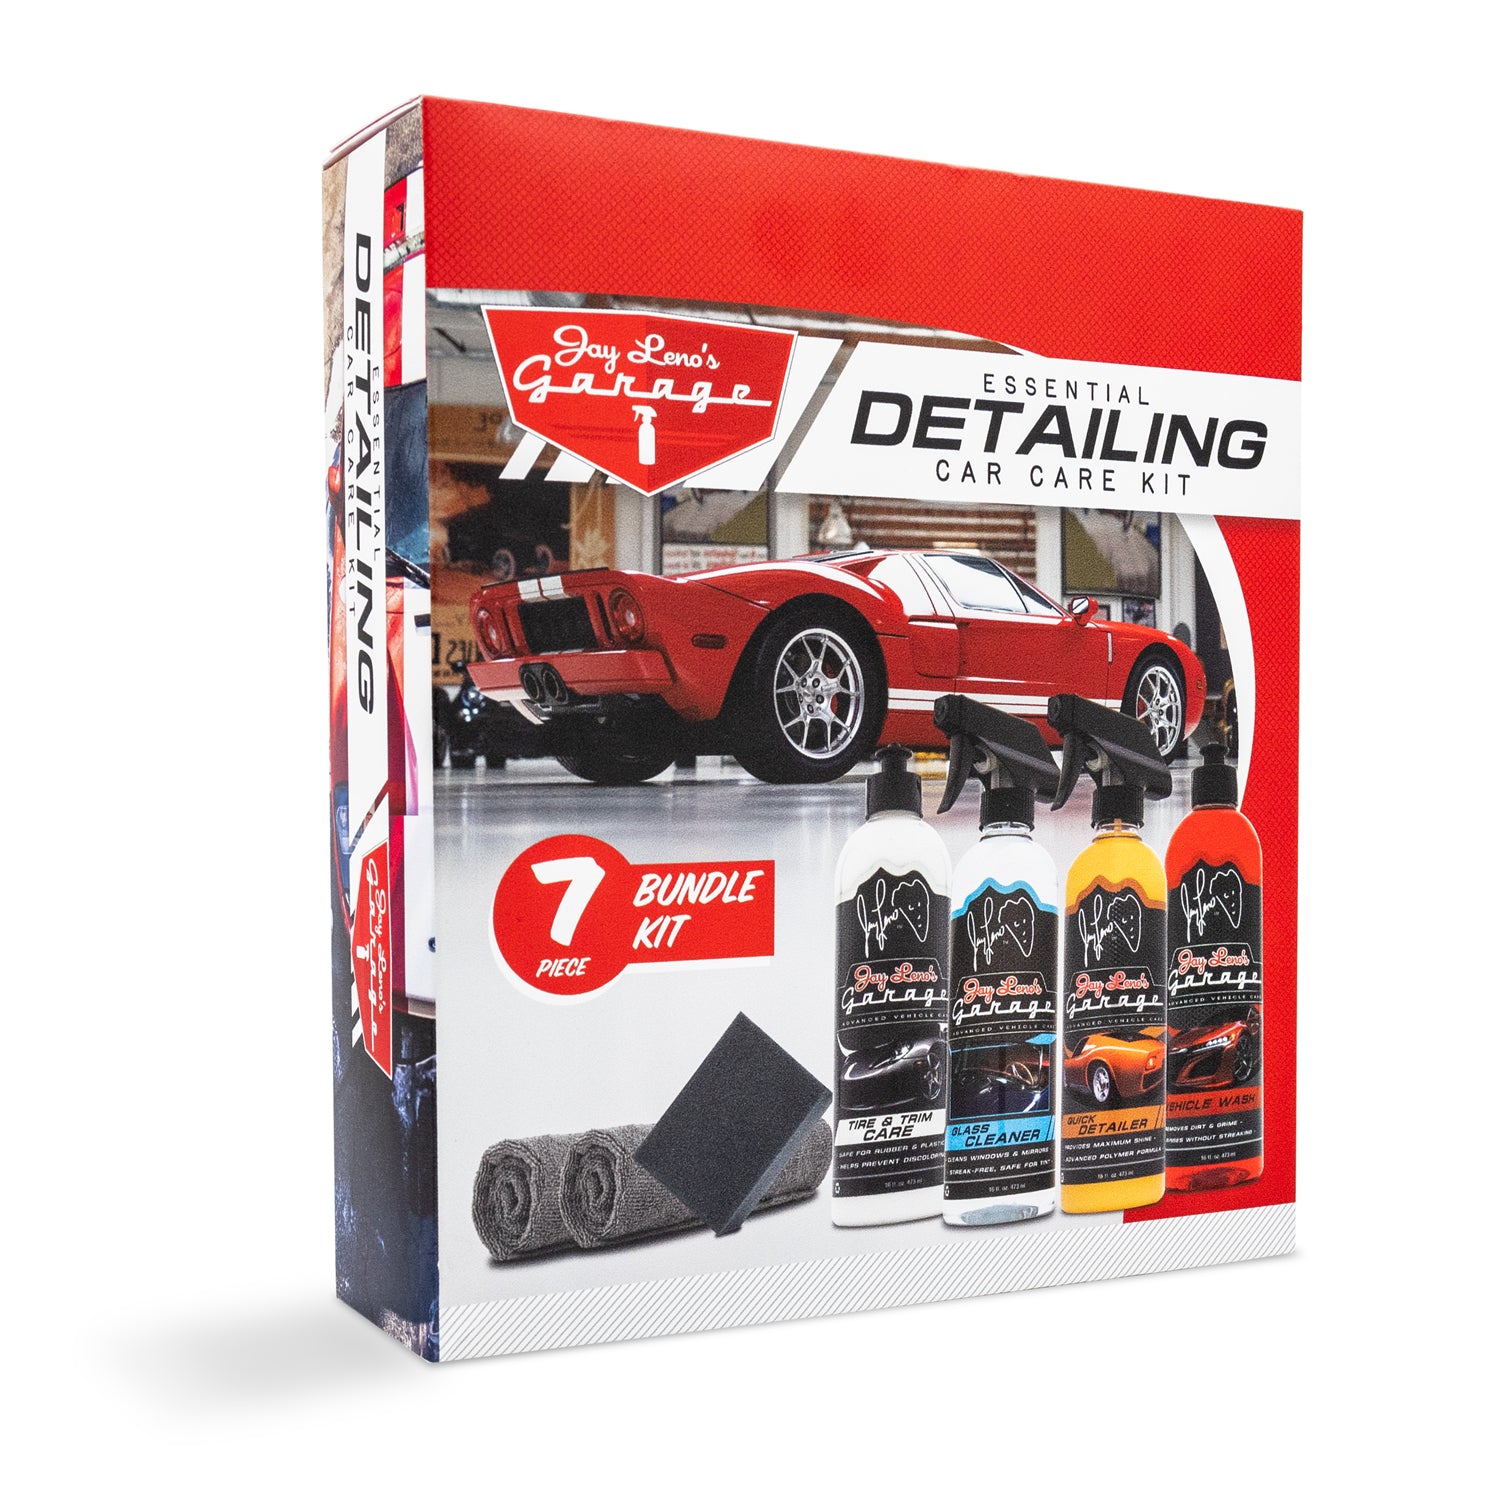 GLOSSONLY Car Care Products-Car Detailing Supplies, Car Care